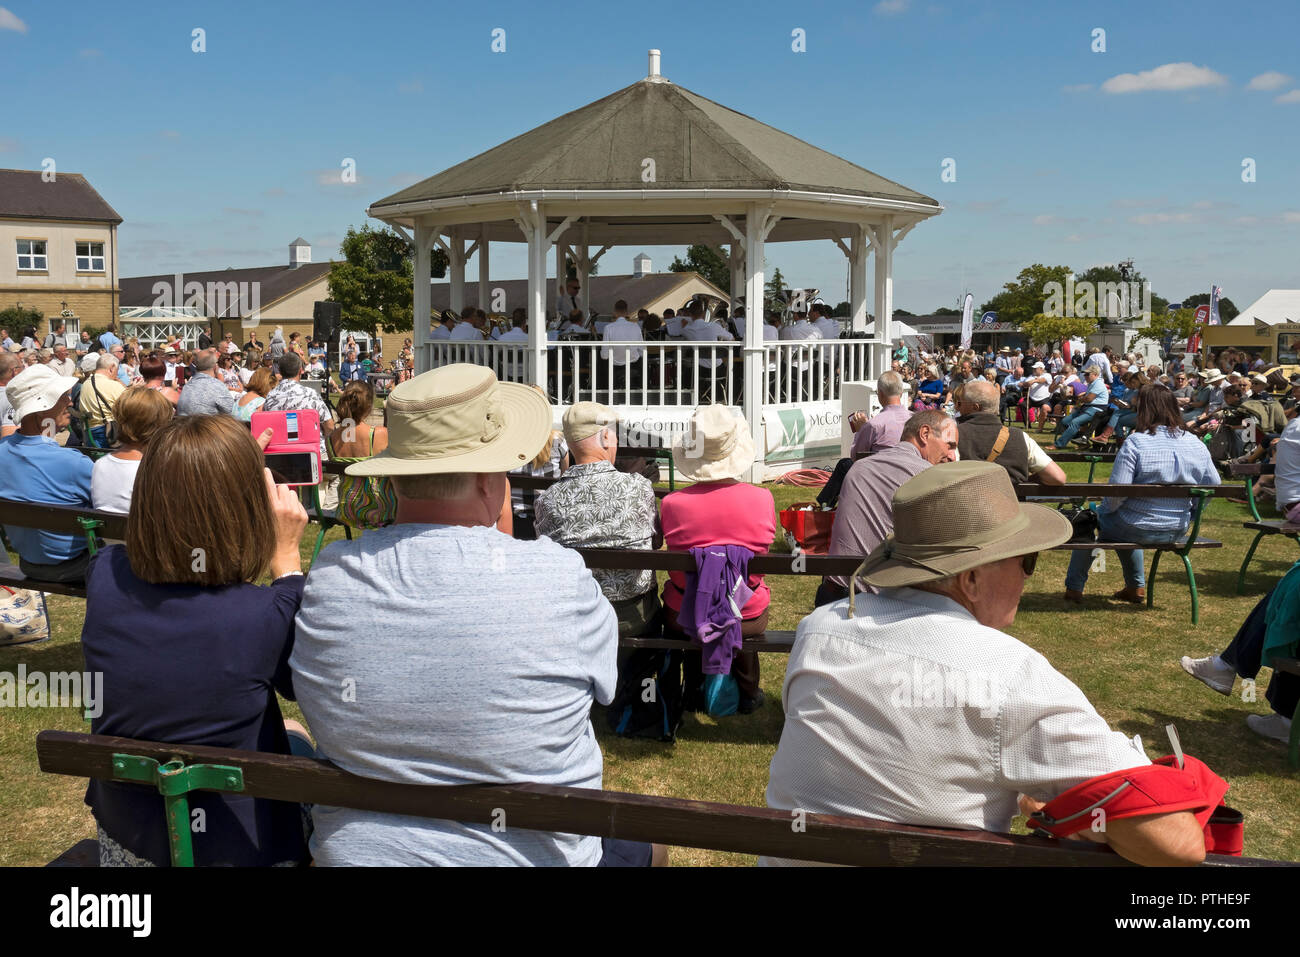 People listening to band playing music at the Great Yorkshire Show in summer Harrogate North Yorkshire England UK United Kingdom GB Great Britain Stock Photo